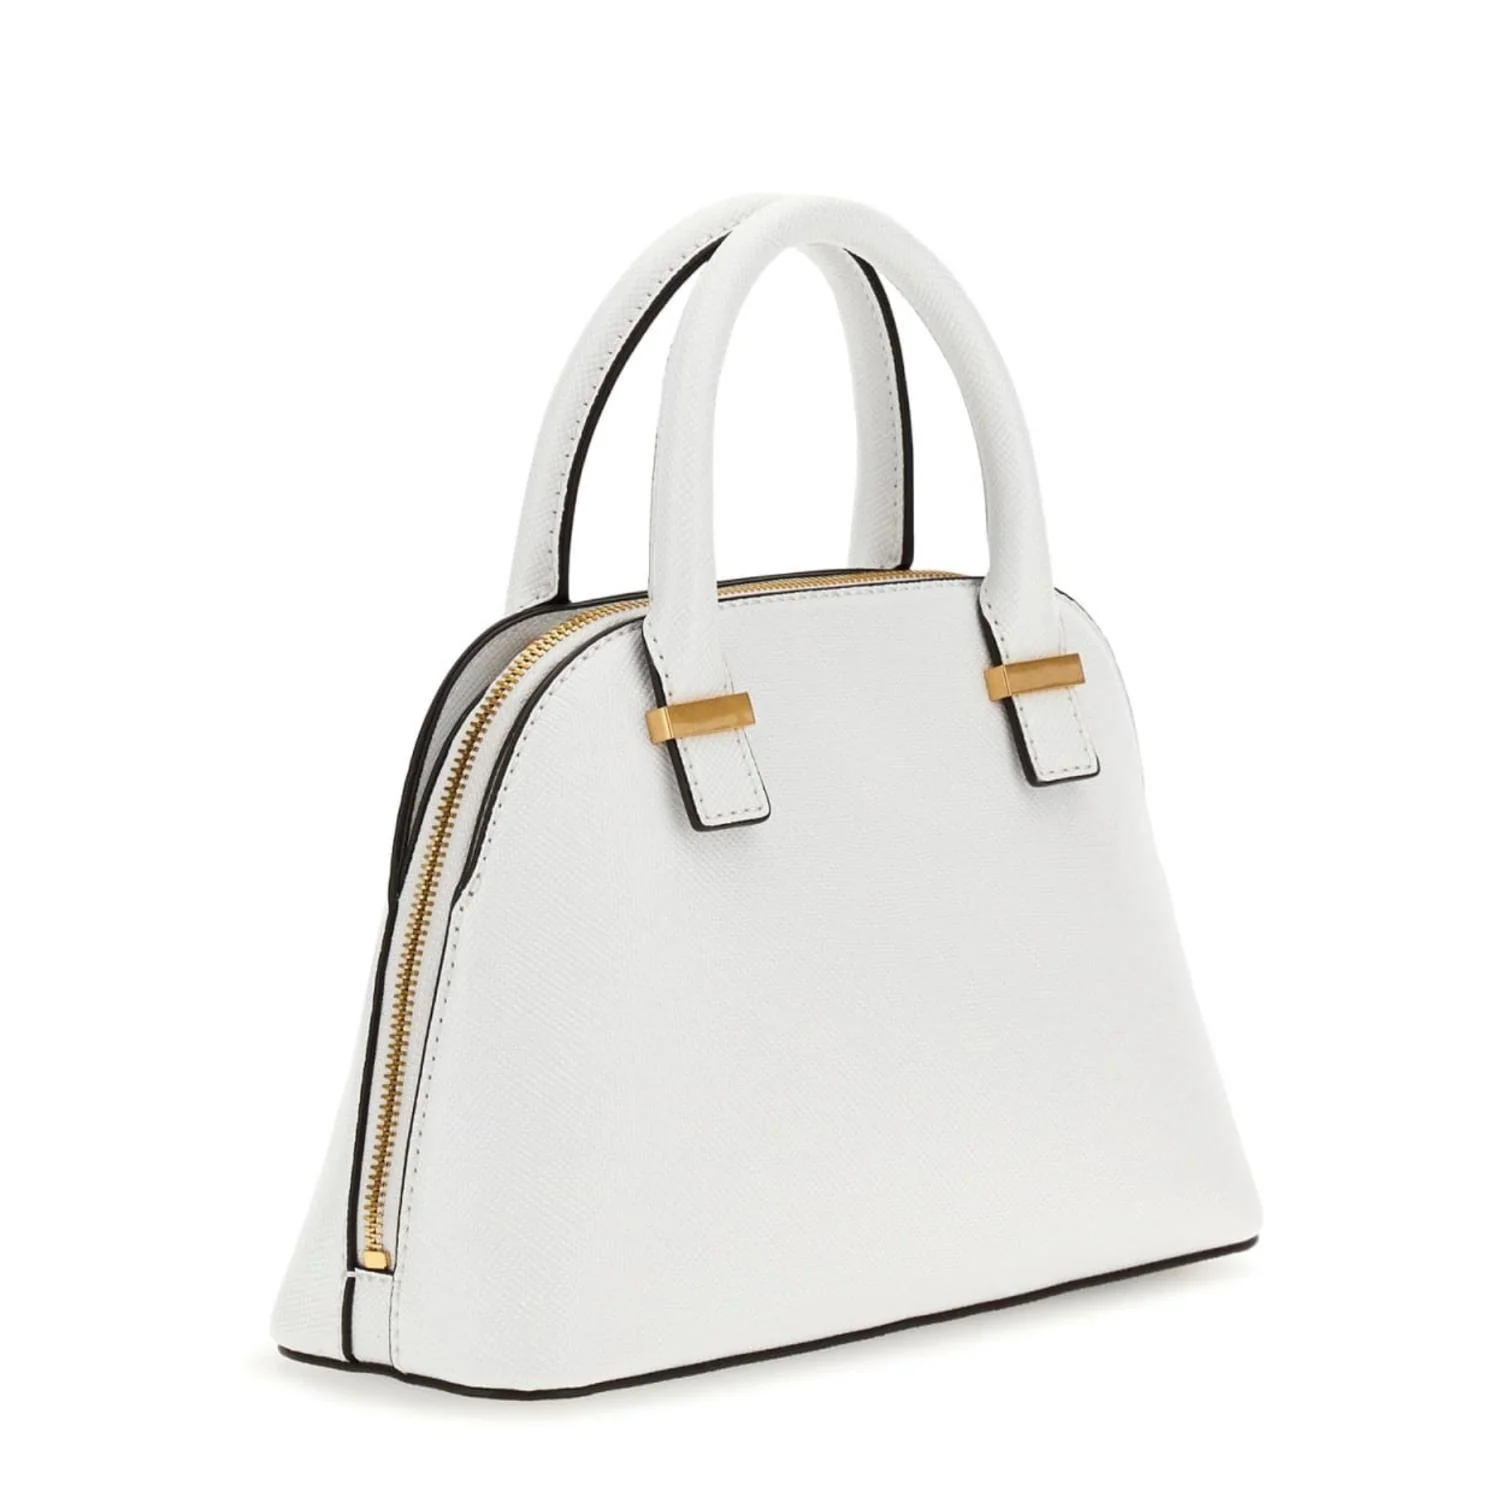 Guess Lossie Satchel White